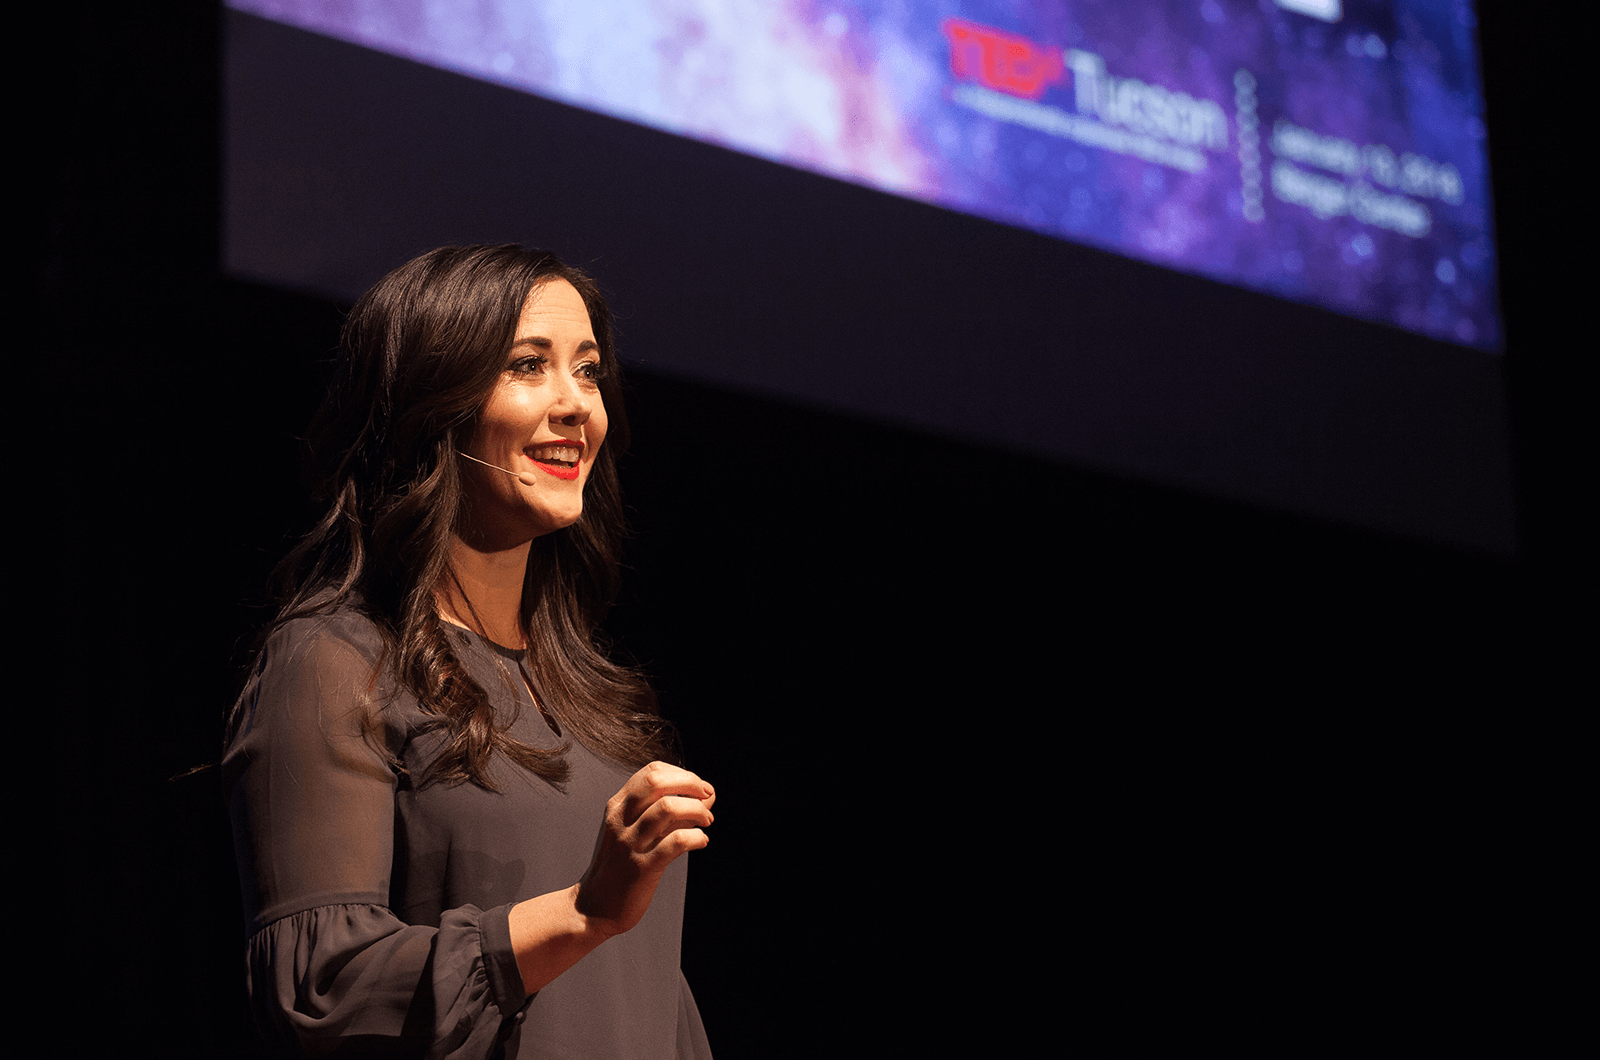 Professional organizer Star Hansen tells her audience at her January 2018 TEDxTuscon talk “Monsters are real, and the bogeyman? He’s in your closet.” 